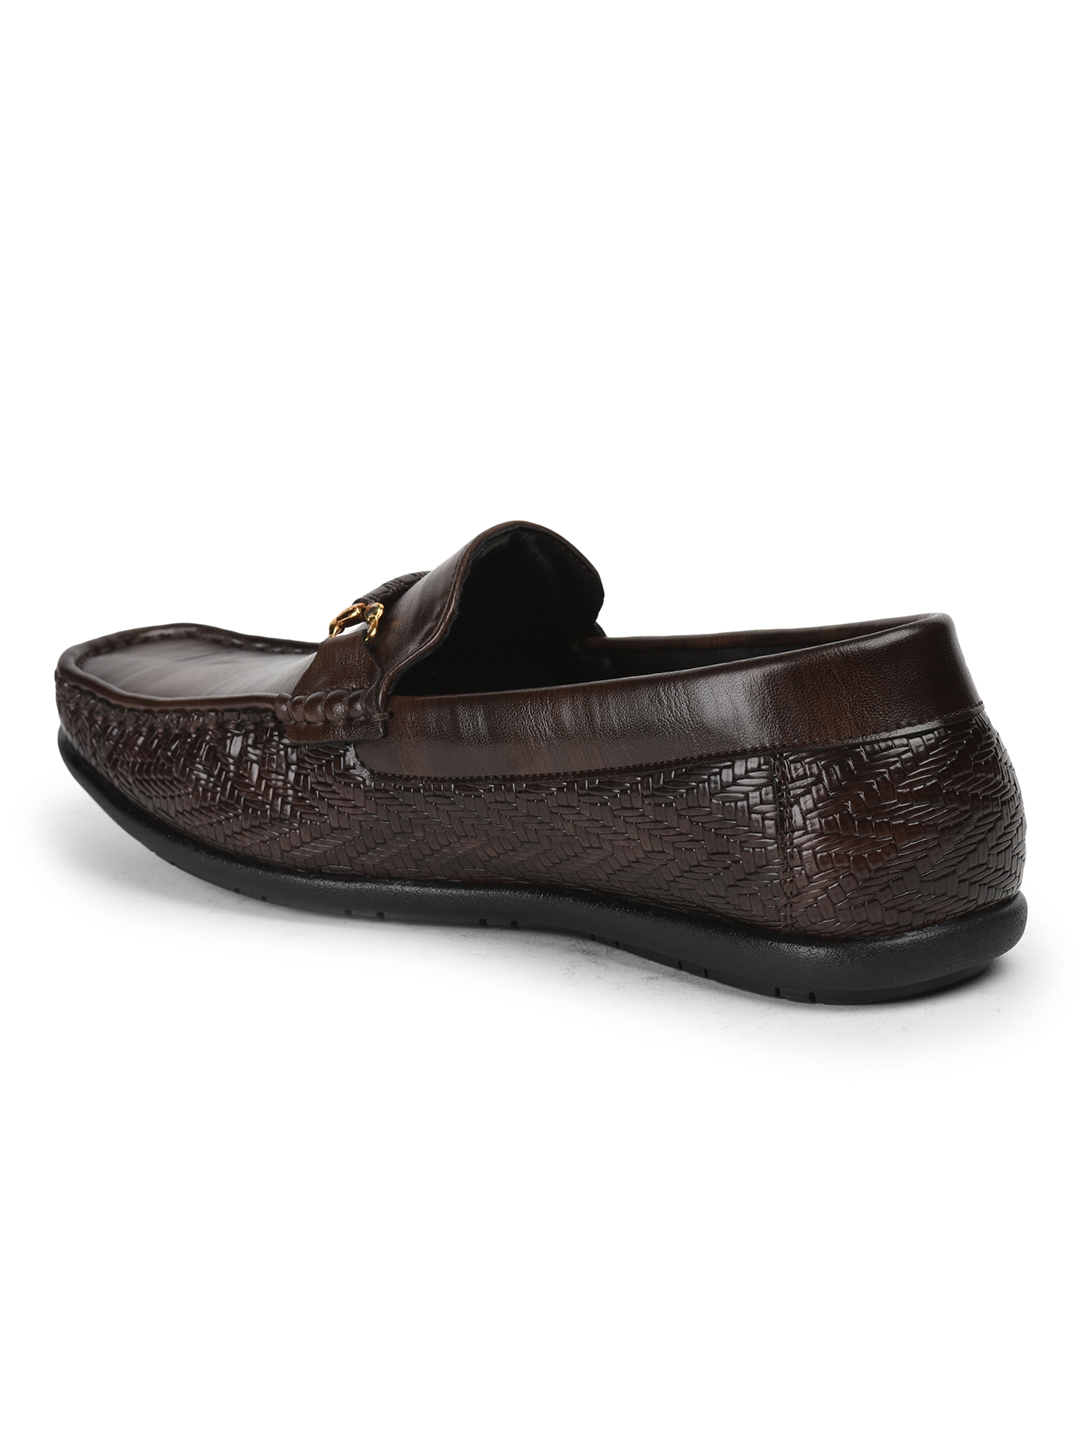 Fortune by Liberty Men's JPL-278 Brown Loafers